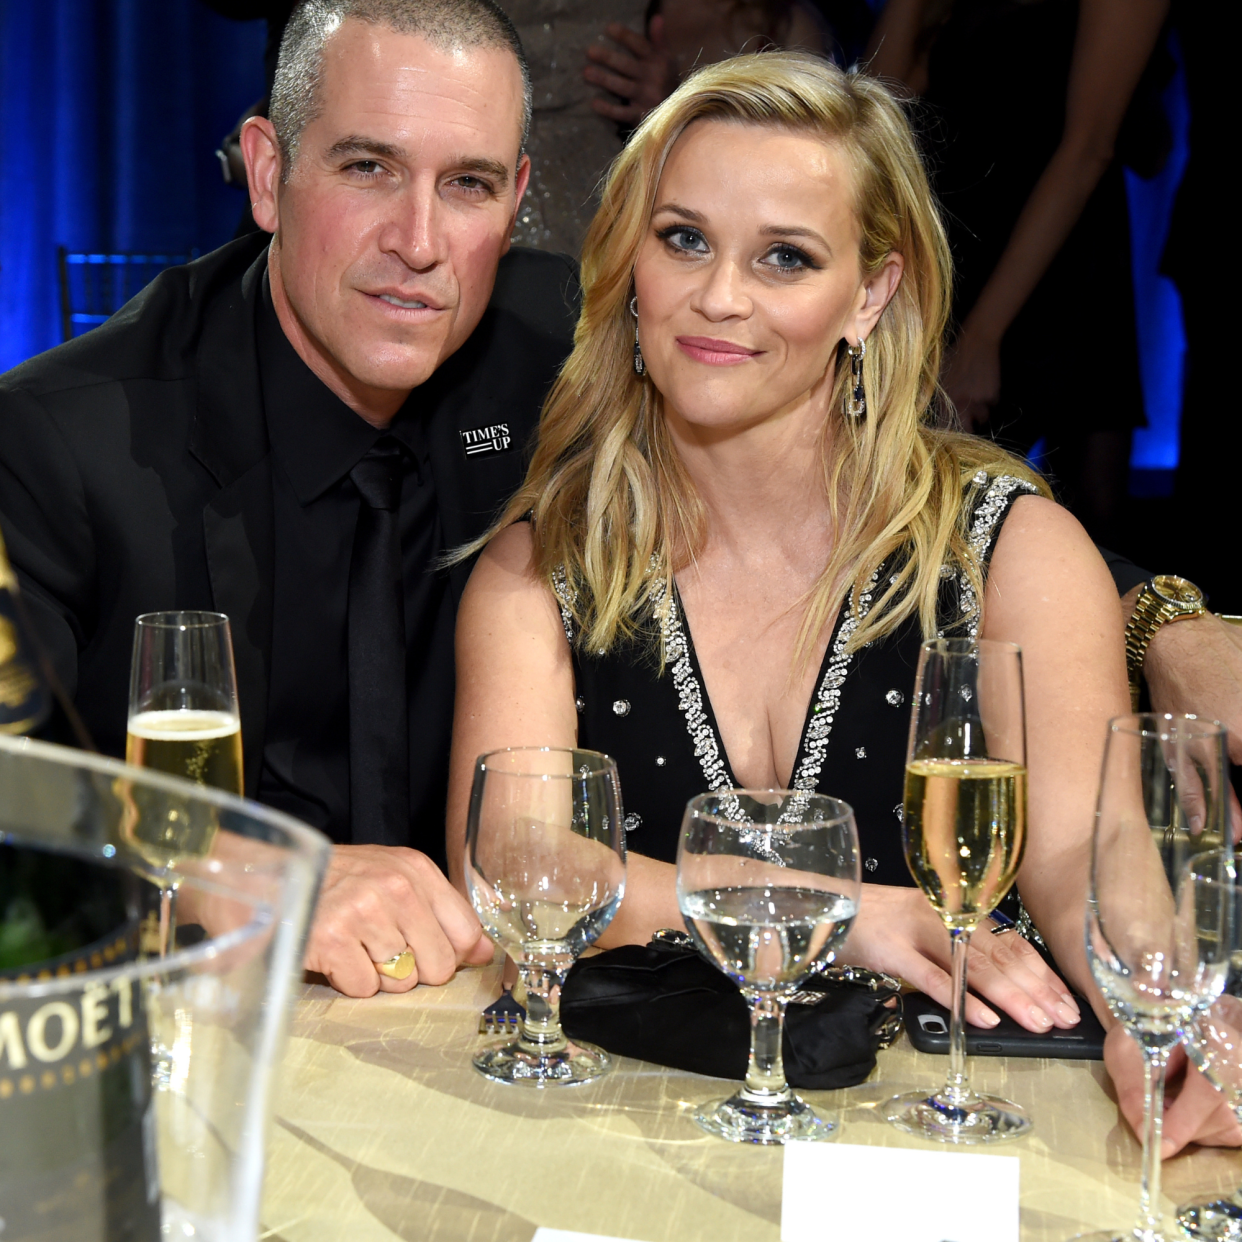  Talent agent Jim Toth (L) and producer-actor Reese Witherspoon attend Moet & Chandon celebrate The 23rd Annual Critics' Choice Awards at Barker Hangar on January 11, 2018 in Santa Monica, California 